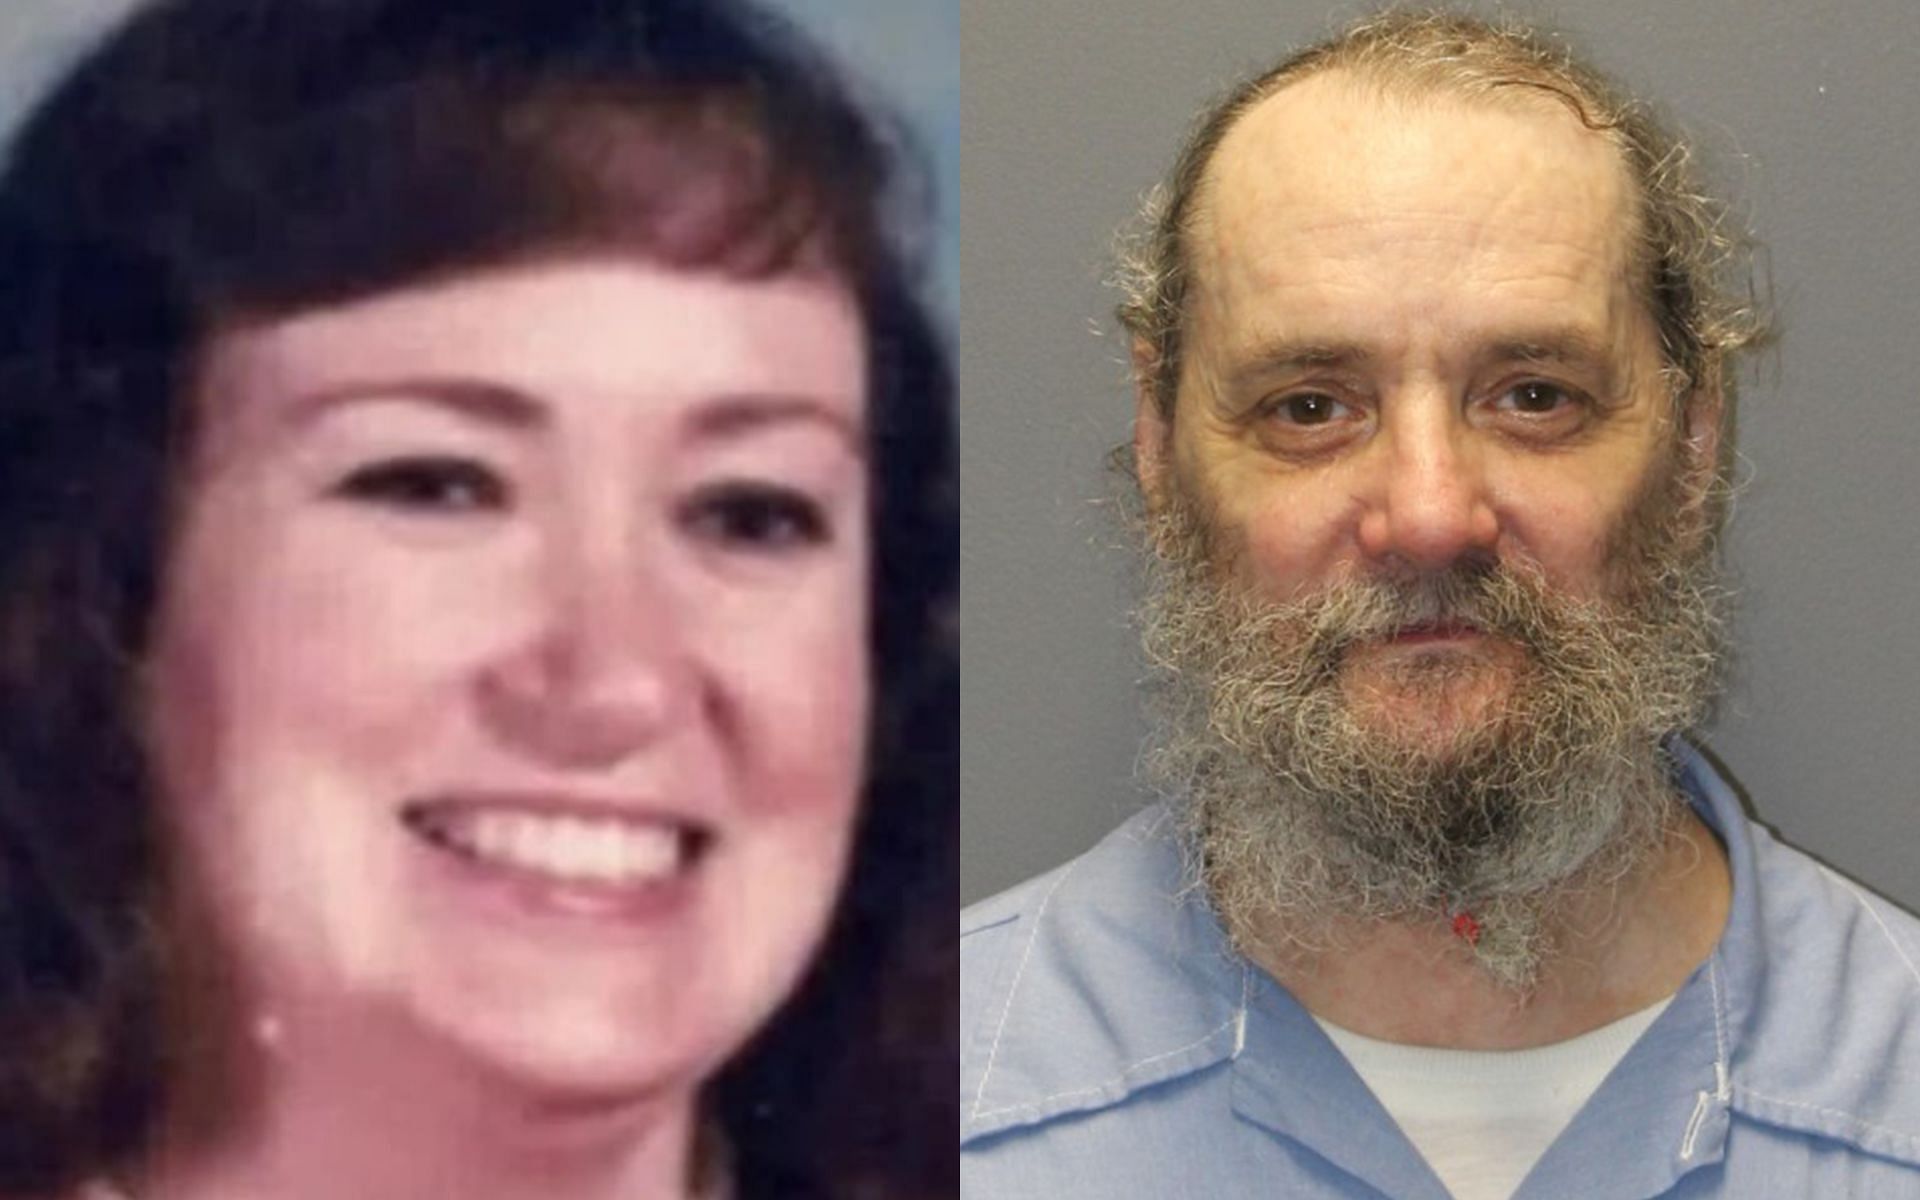 Homicide Hotel will chronicle the homicide of Mary Klatt by Roger Allen Morton (Image via Investigation Discovery)